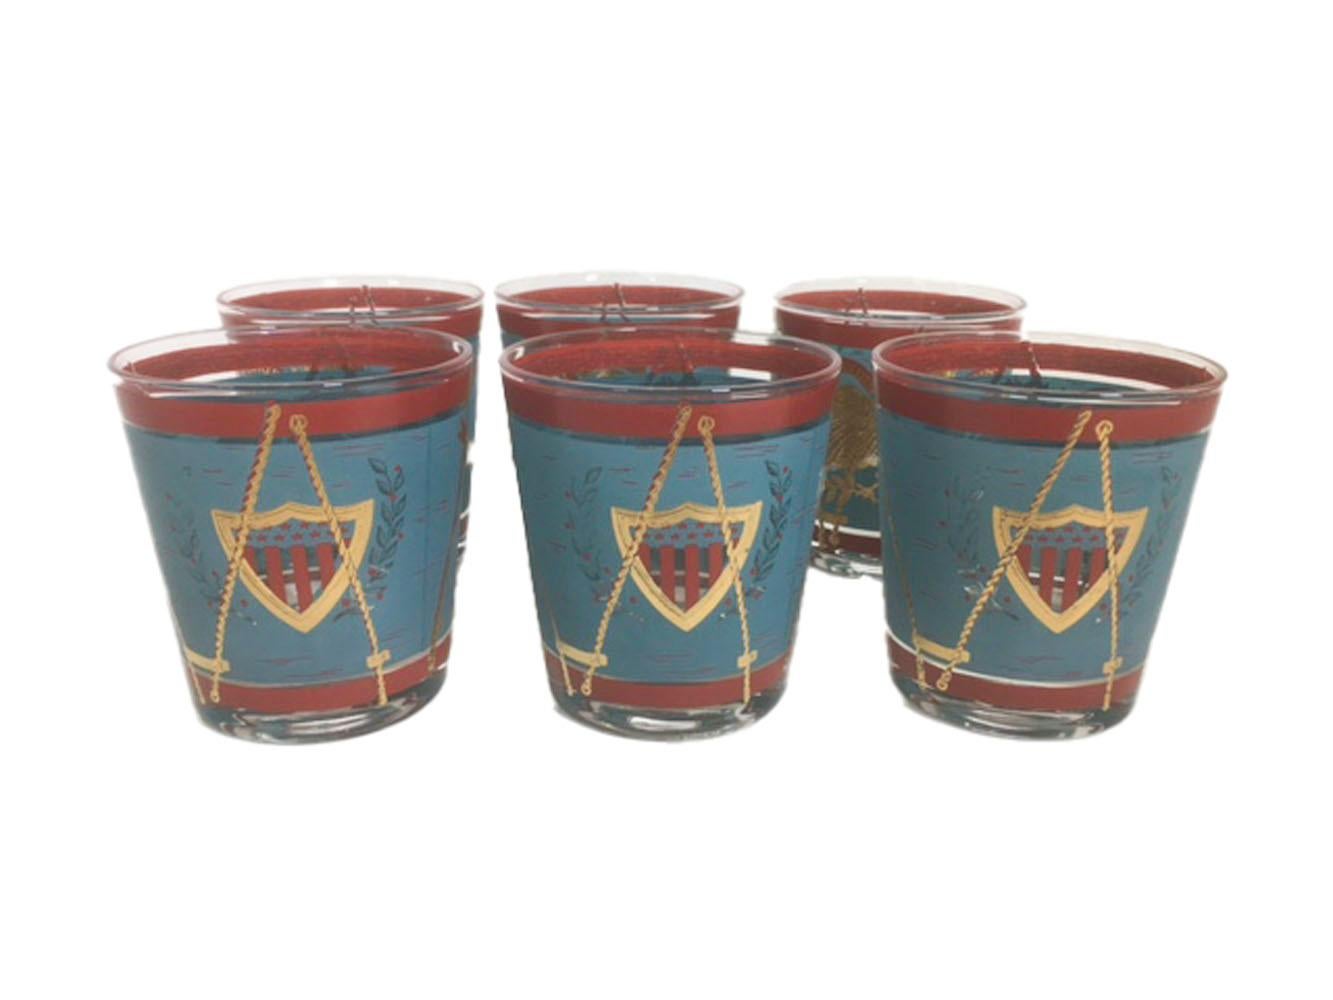 Mid-Century Modern old fashioned glasses decorated as parade drums in teal and red enamel with 22 karat gold.
The front with a large patriotic eagle below a banner with the motto E Pluribus Unum. The eagle with a stars and stripes shield on its